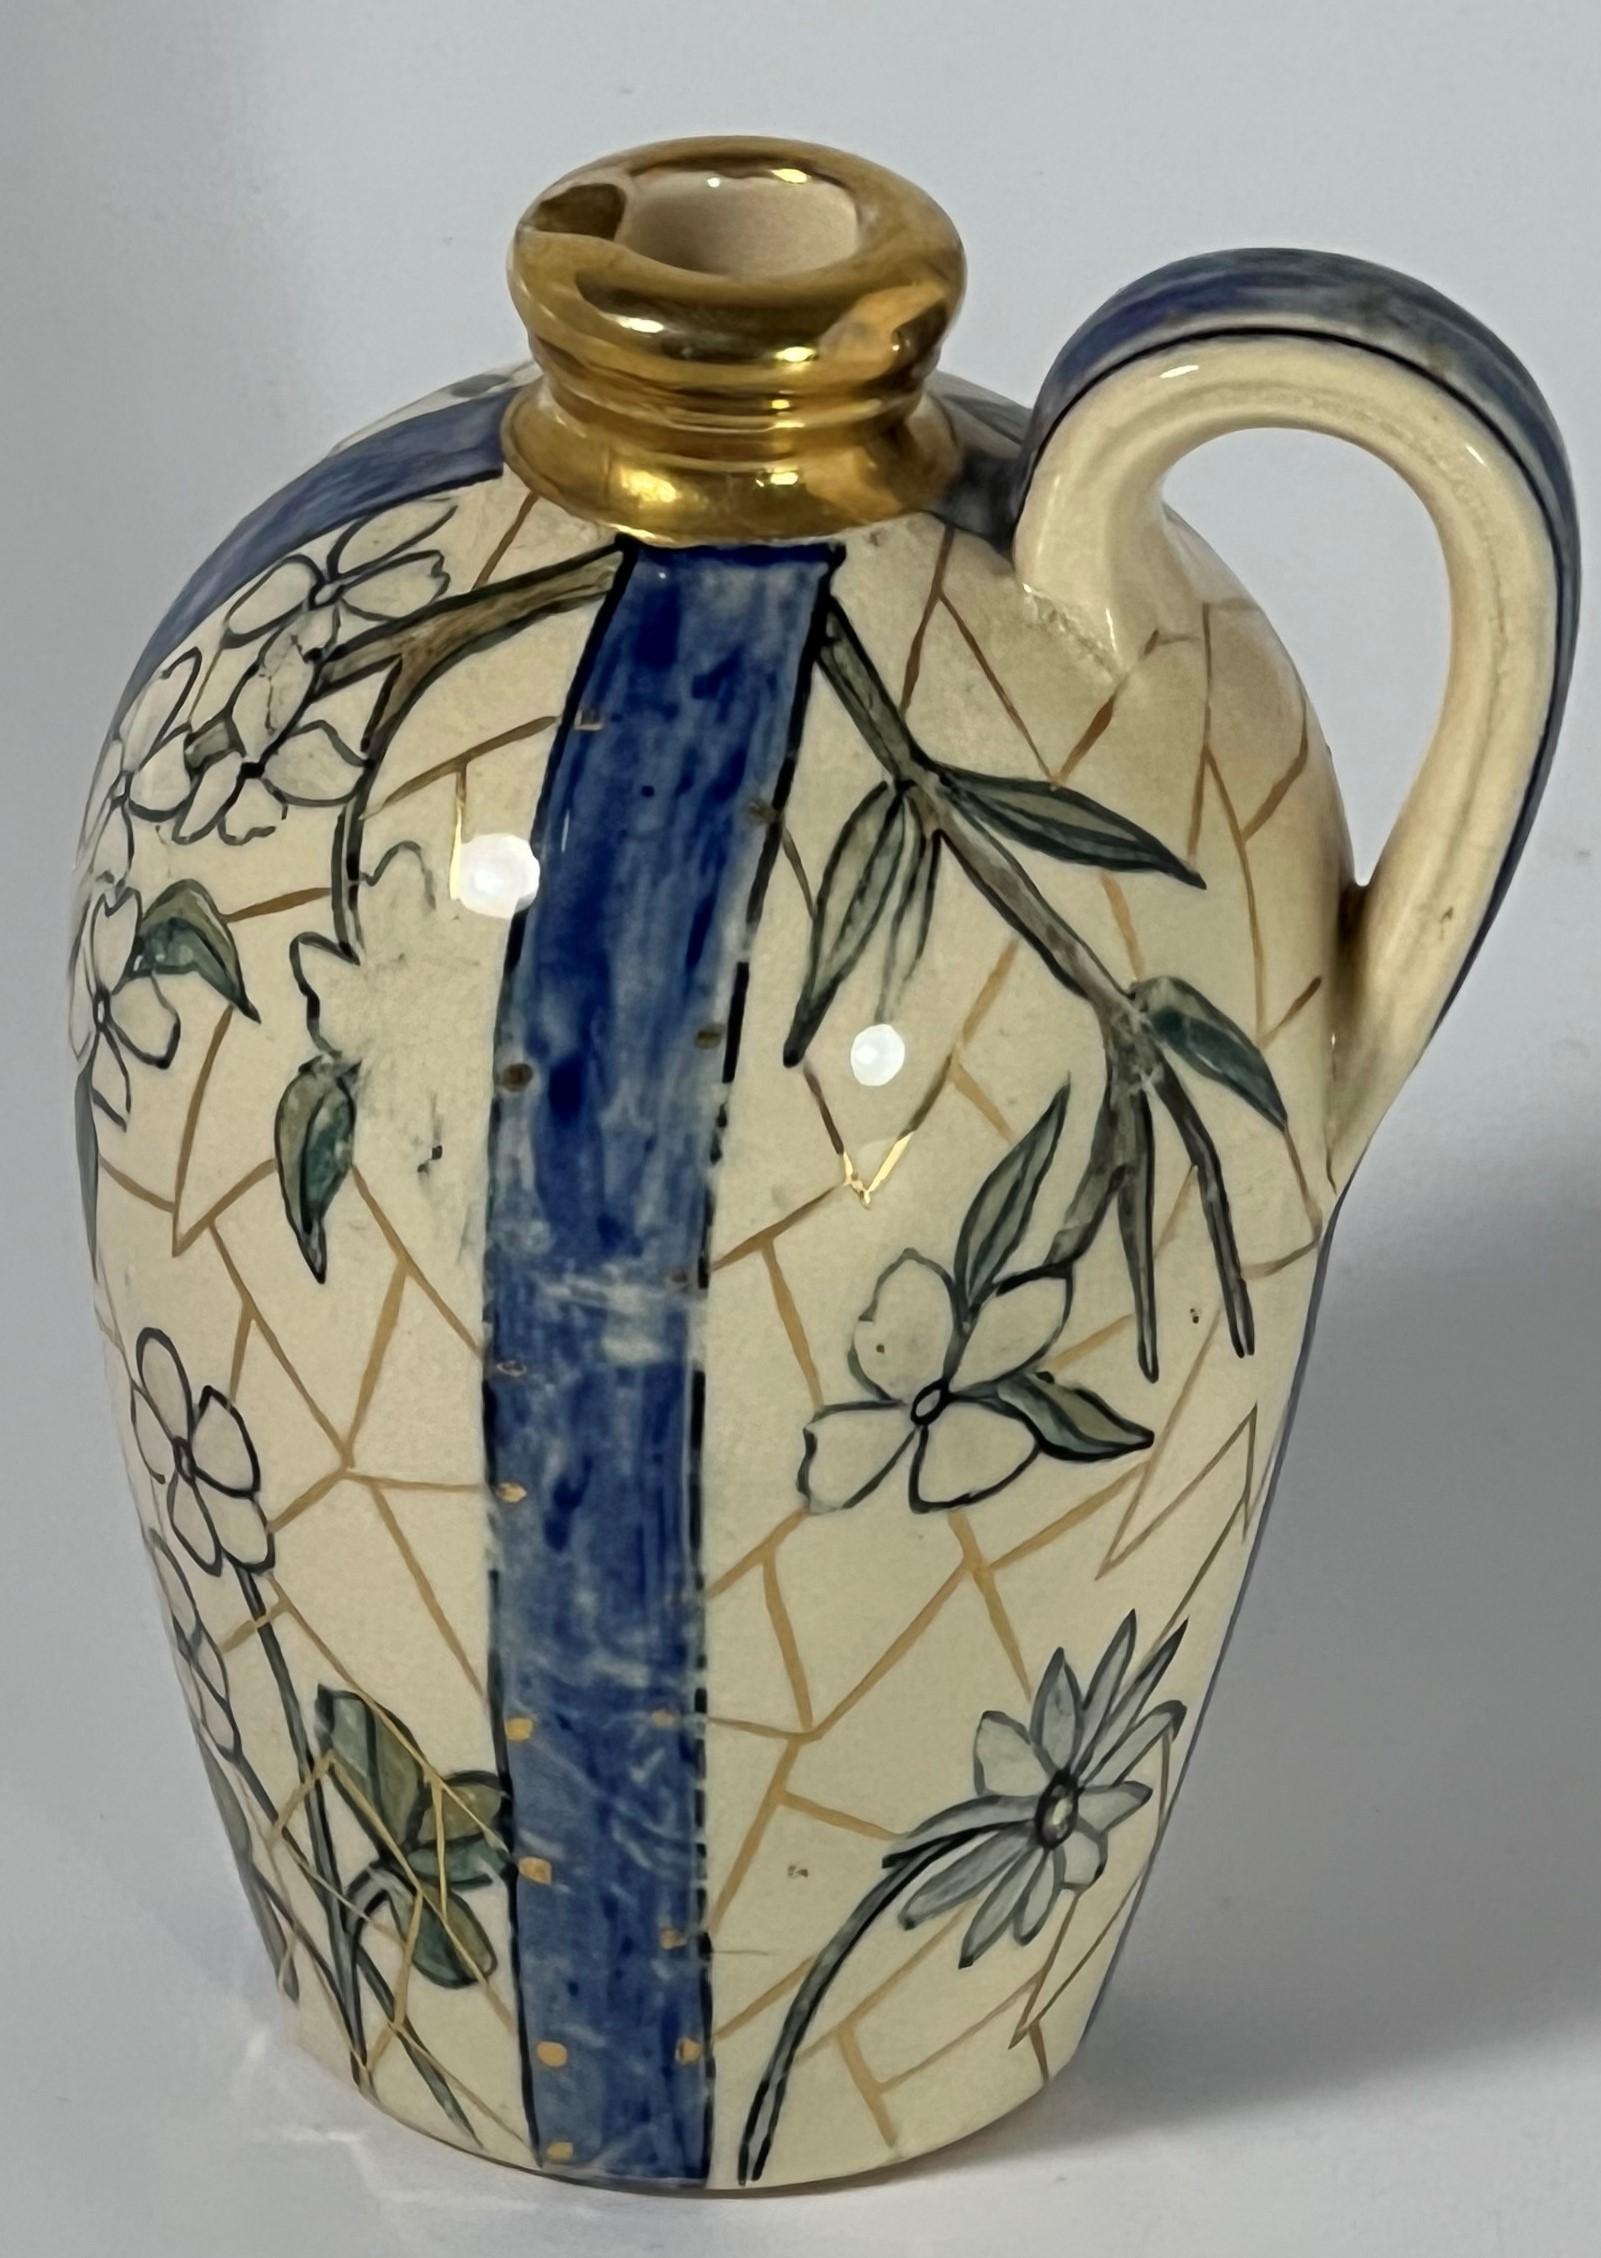 Rookwood pottery was established based upon Arts and Crafts ideals positing the celebration and elevation of pottery as an art form.  Both professional and amateur decorators and potters were instrumental in the success of what became an art